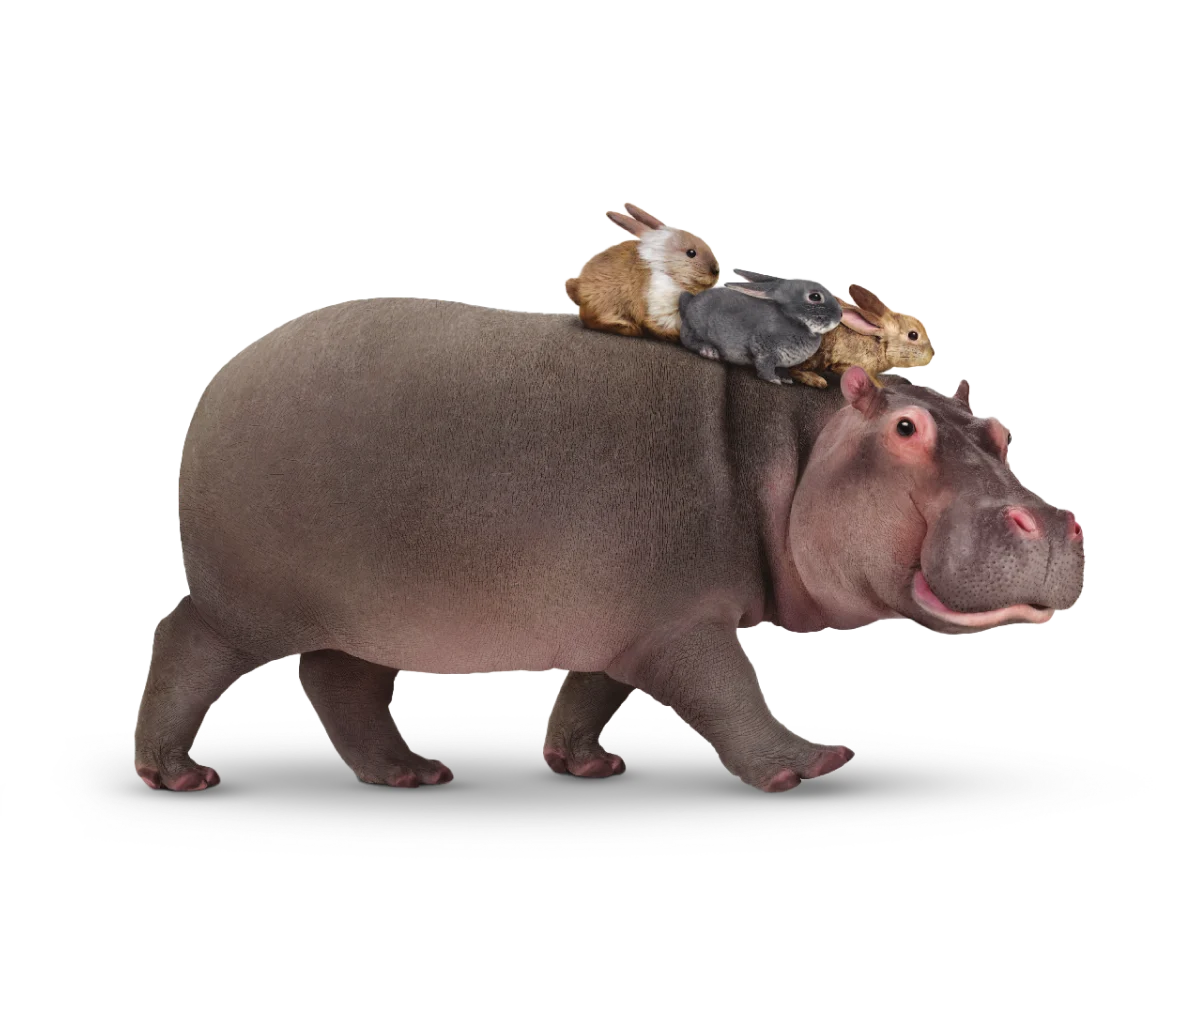 A hippopotamus brings his three bunny friends over to big savings on TELUS mobility